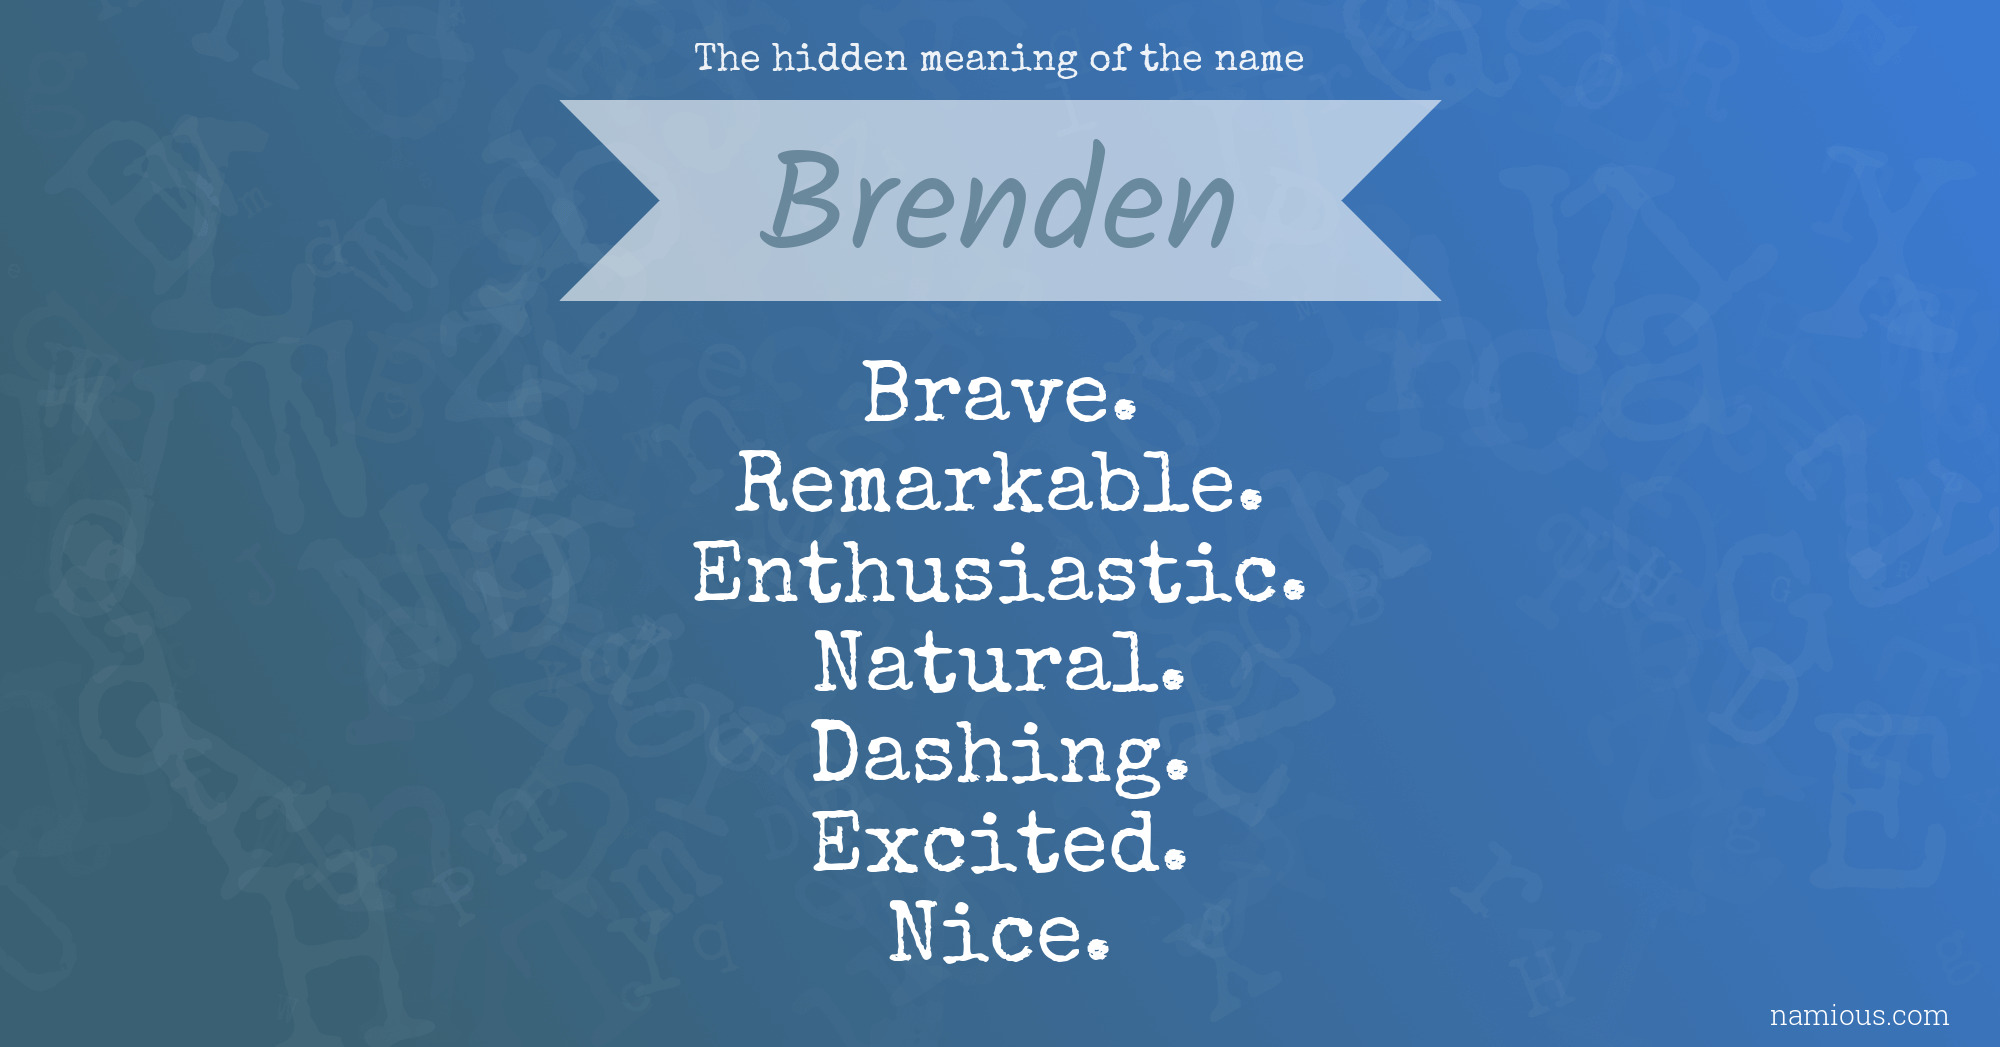 The hidden meaning of the name Brenden